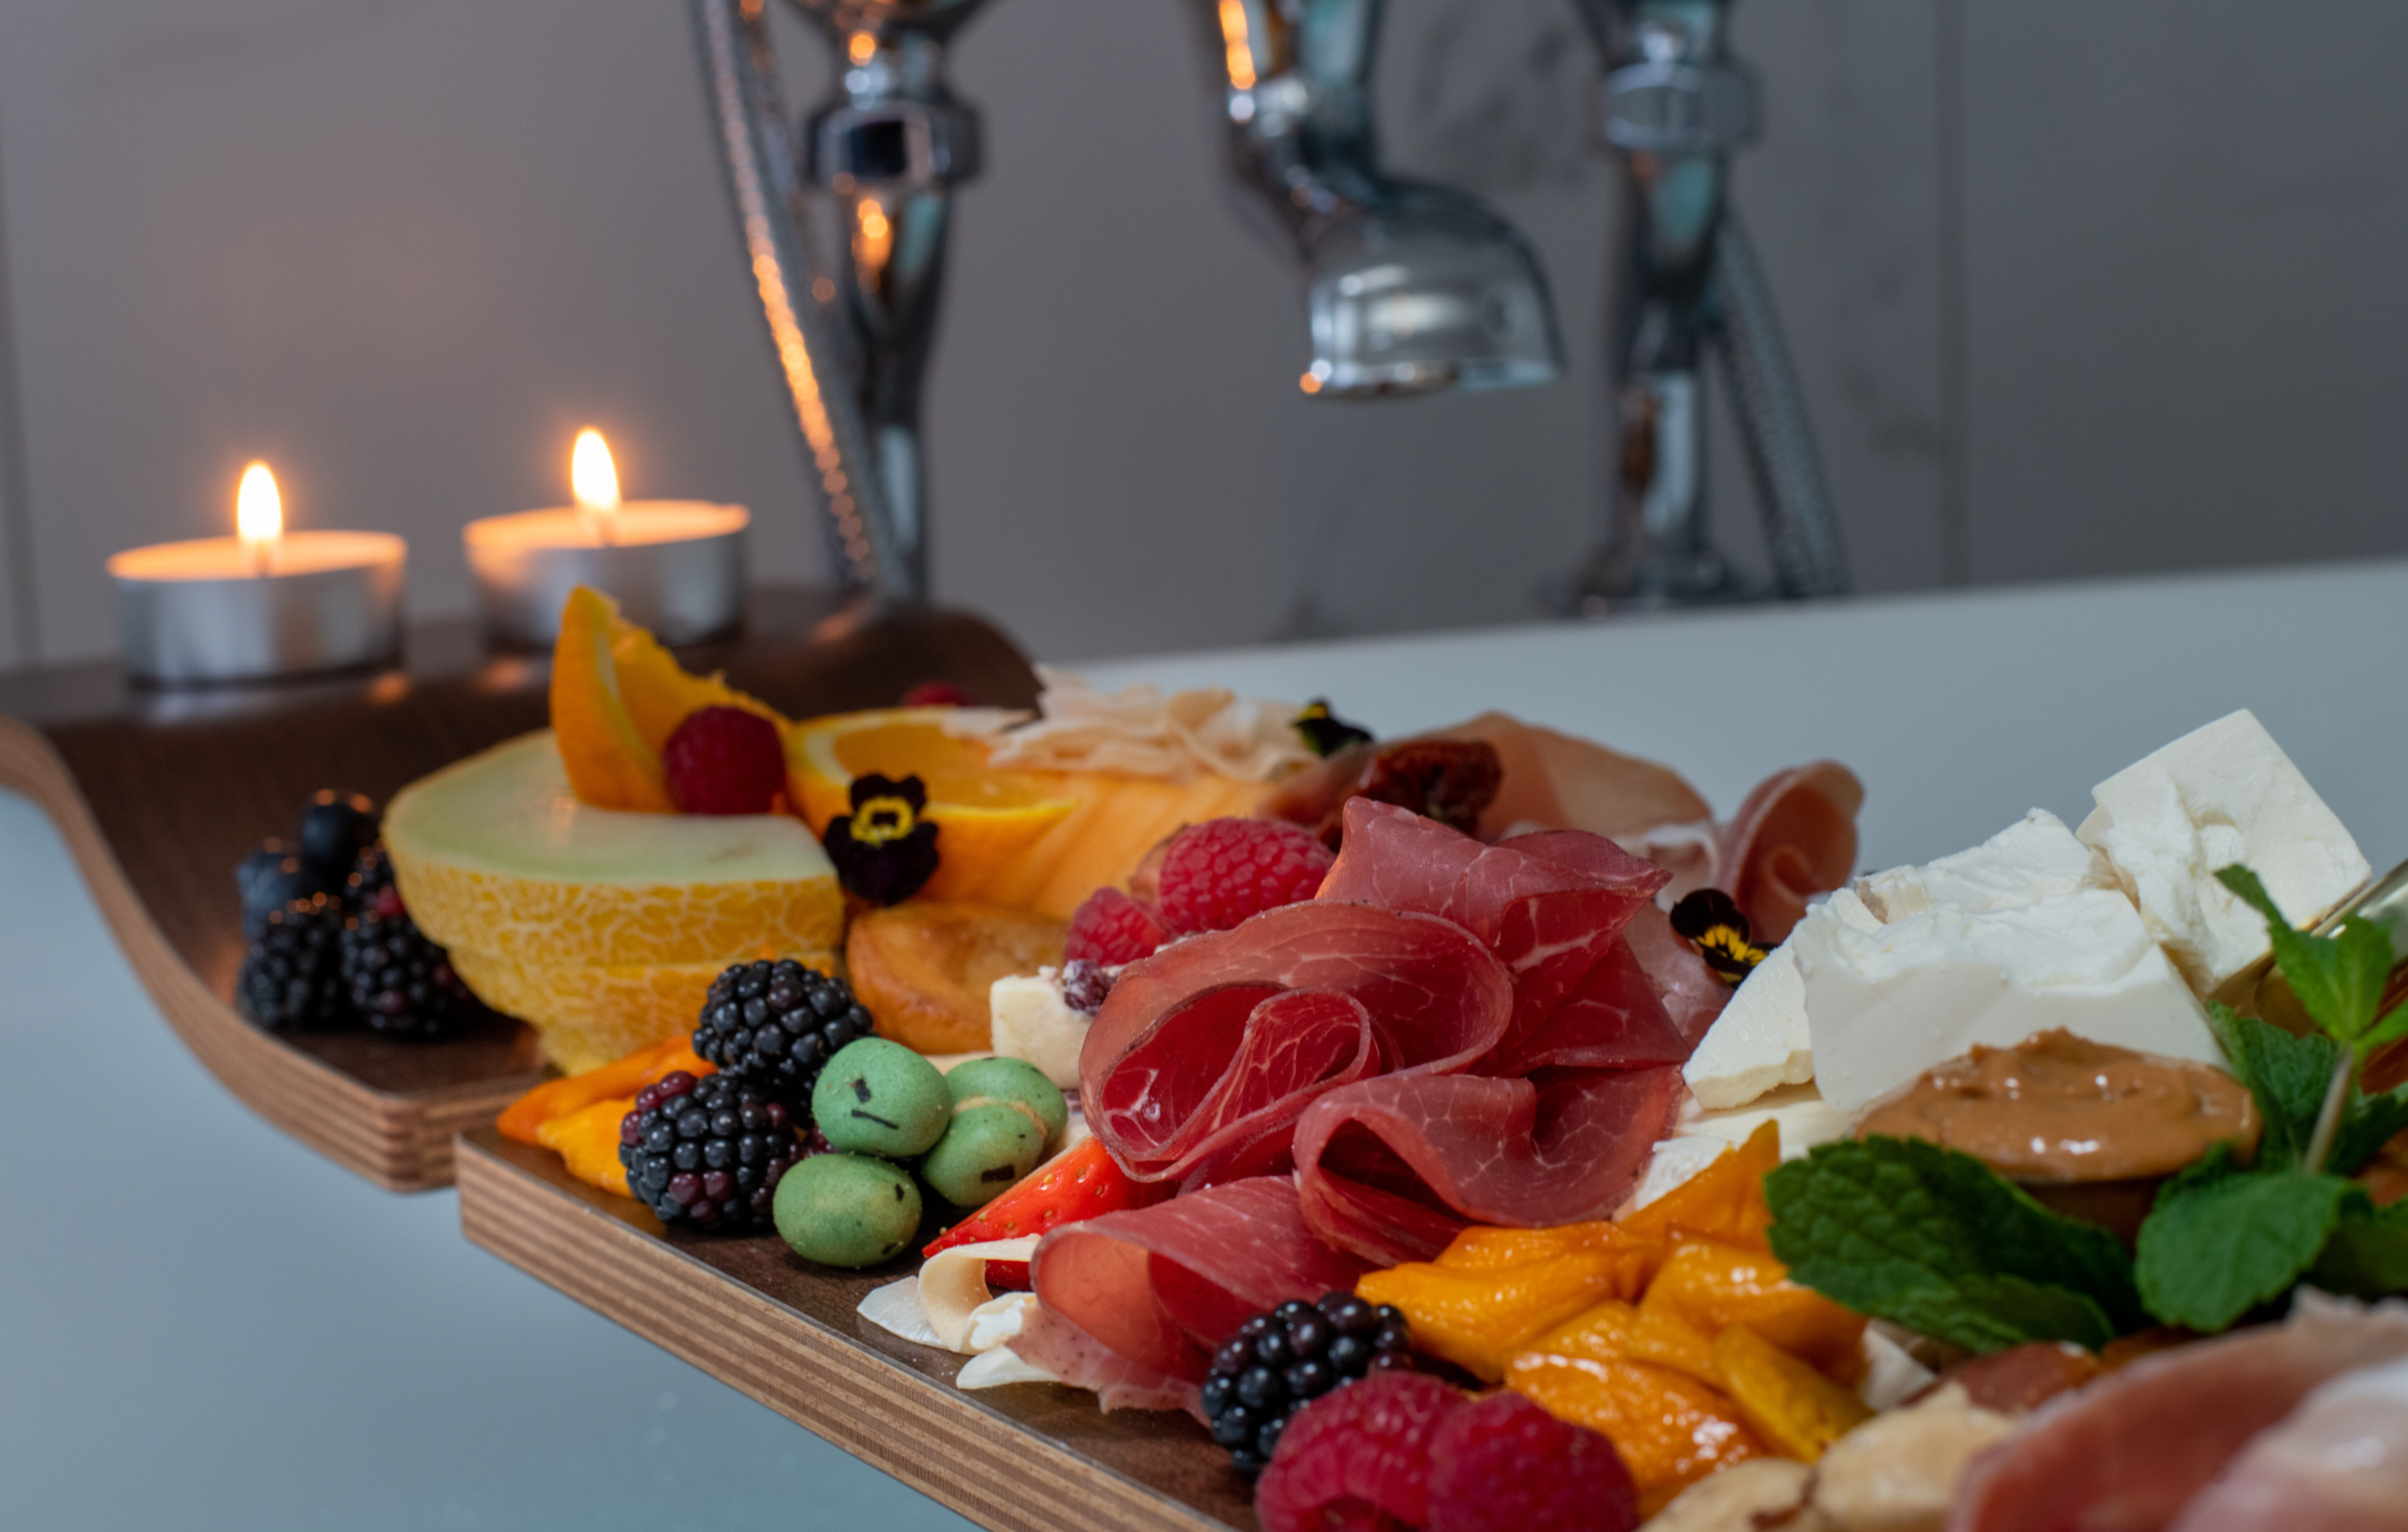 image of a bath board with charcuterie food items and two lit candles.